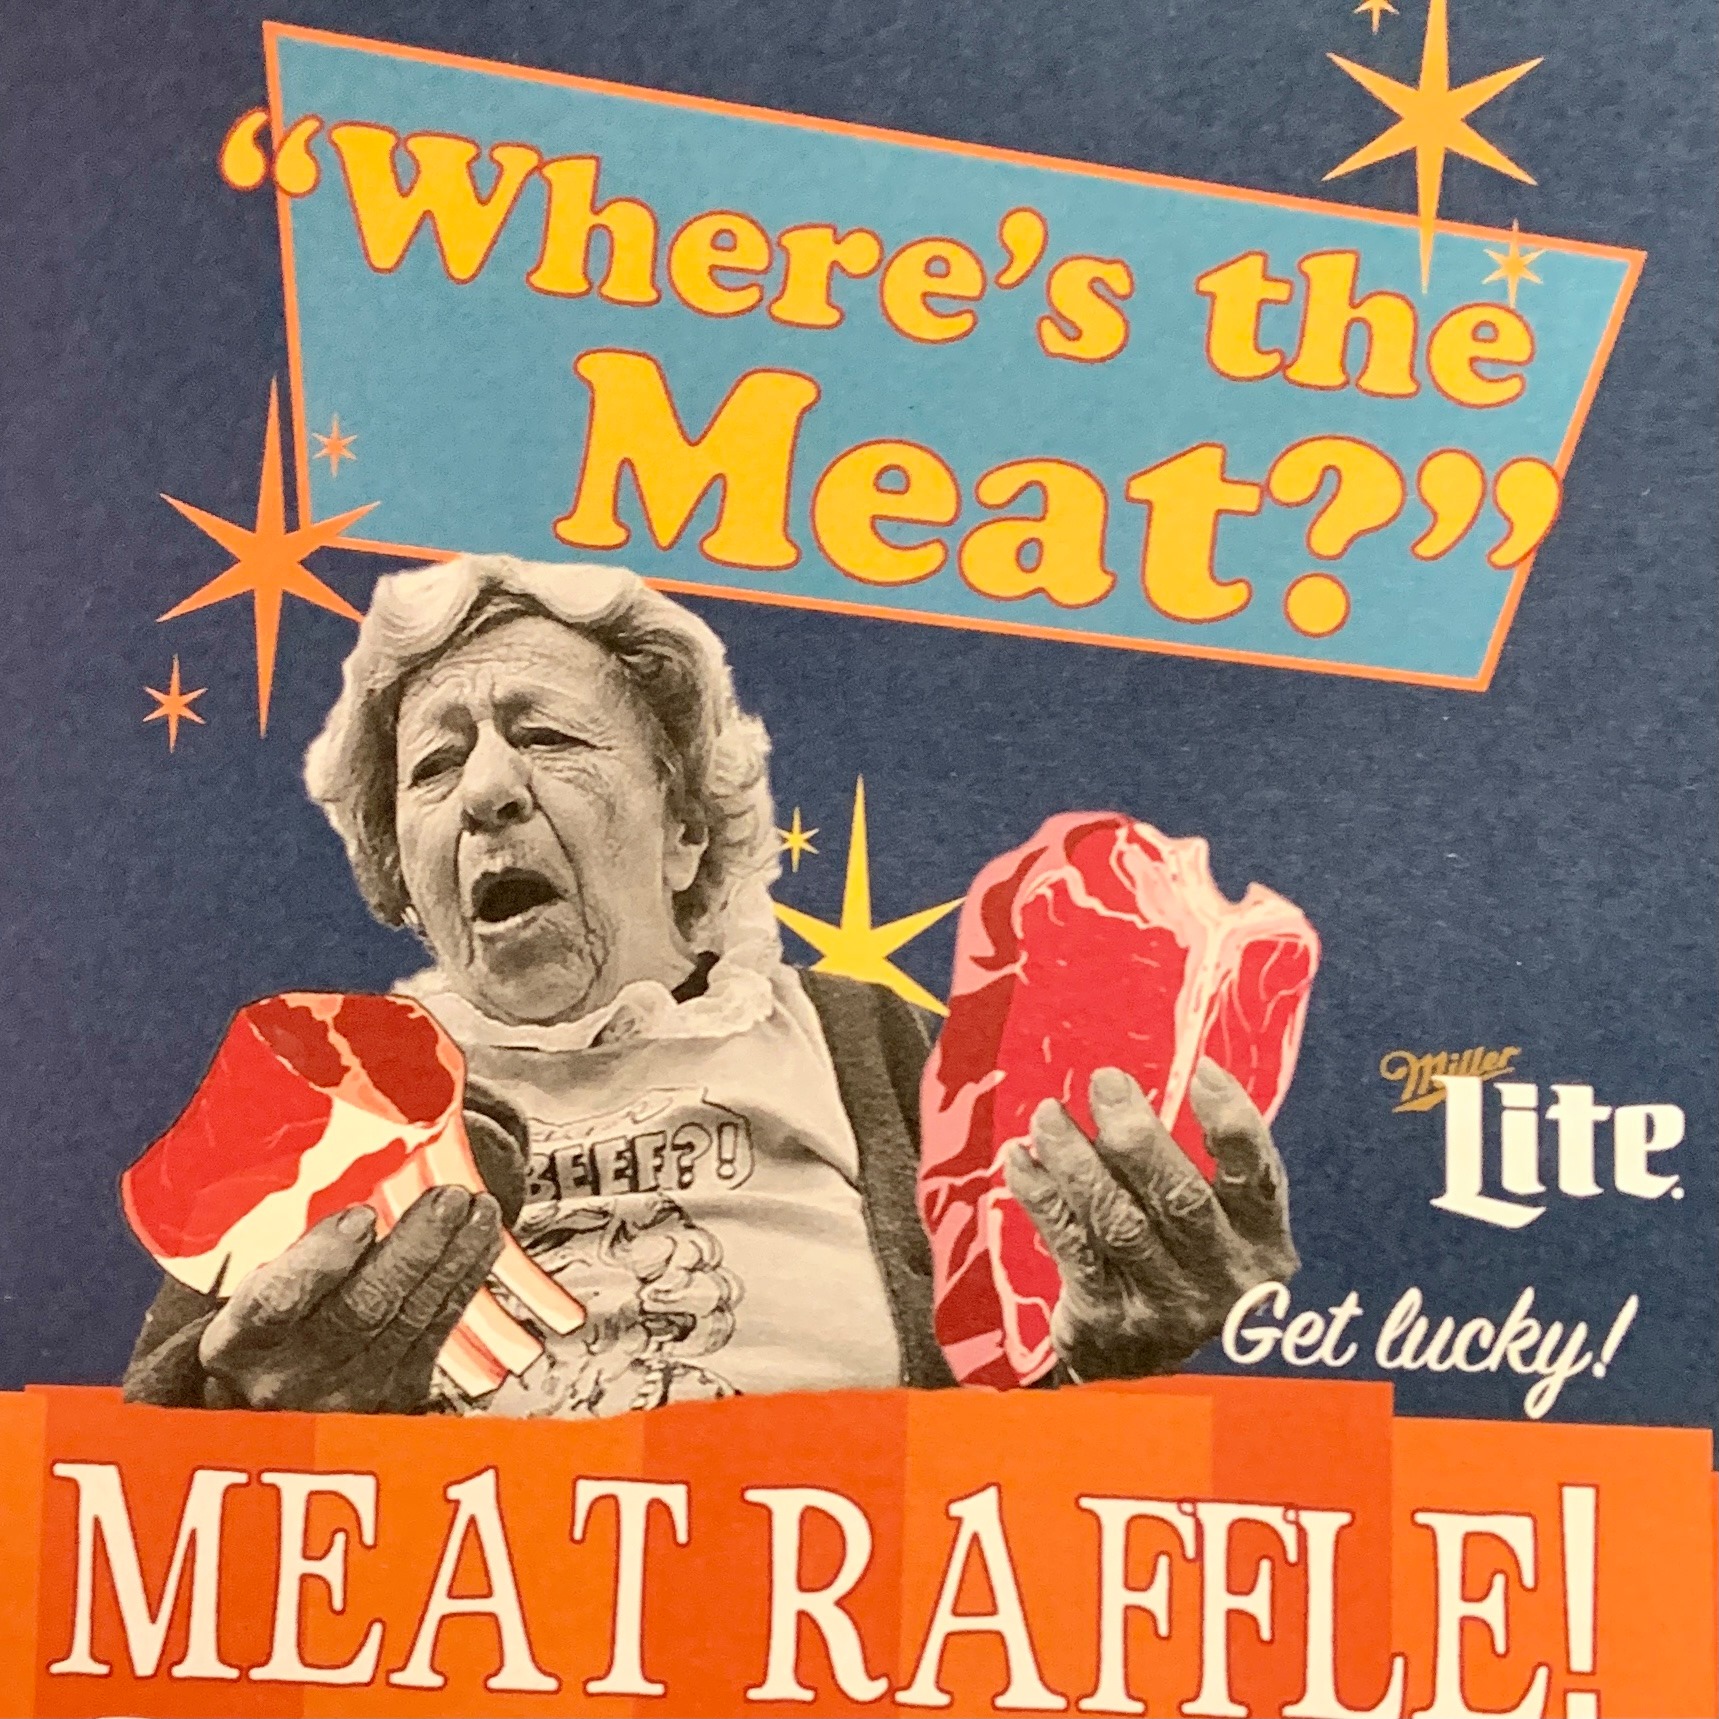 humerous meat raffle poster asking "where's the meat?"